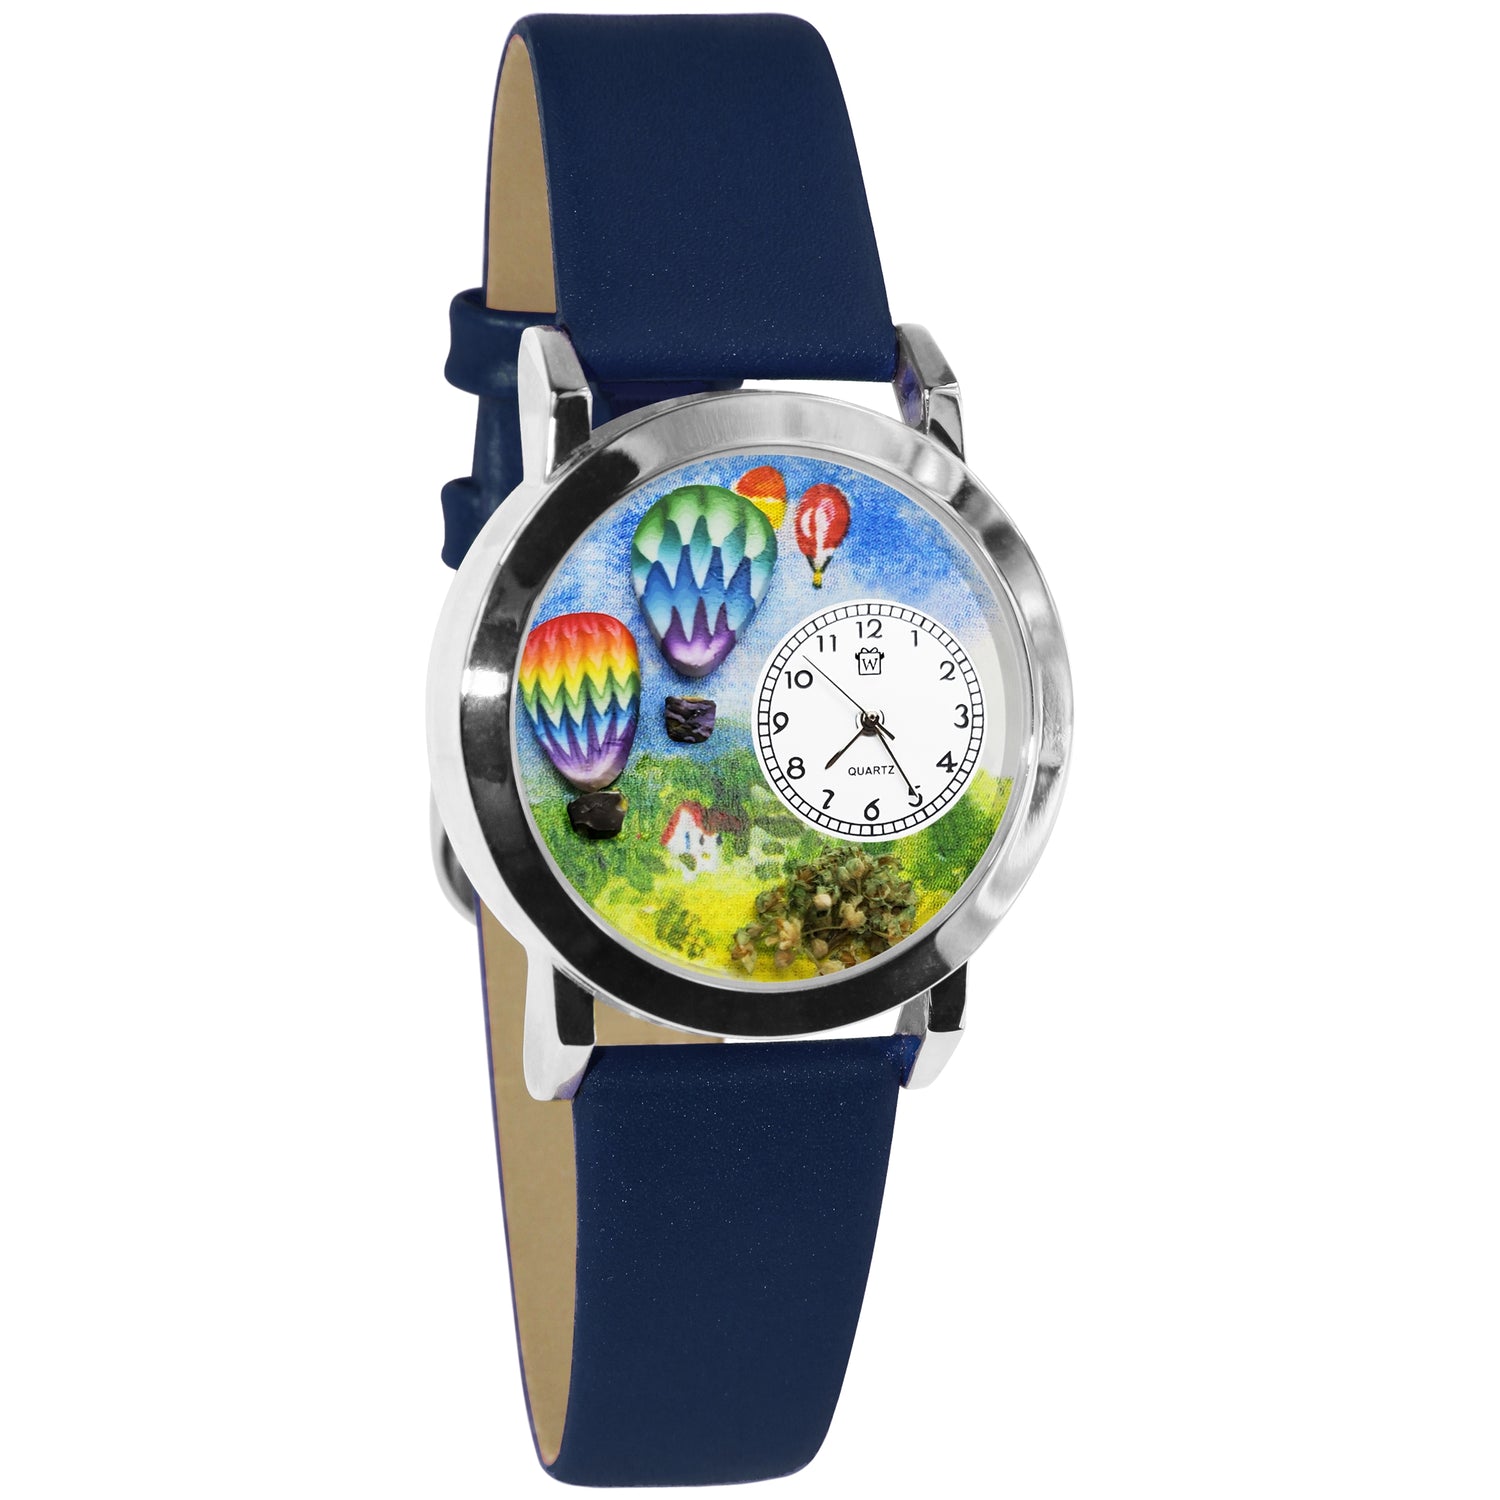 Whimsical Gifts | Hot Air Balloons 3D Watch Small Style | Handmade in USA | Hobbies & Special Interests | Outdoor Hobbies | Novelty Unique Fun Miniatures Gift | Silver Finish Blue Leather Watch Band